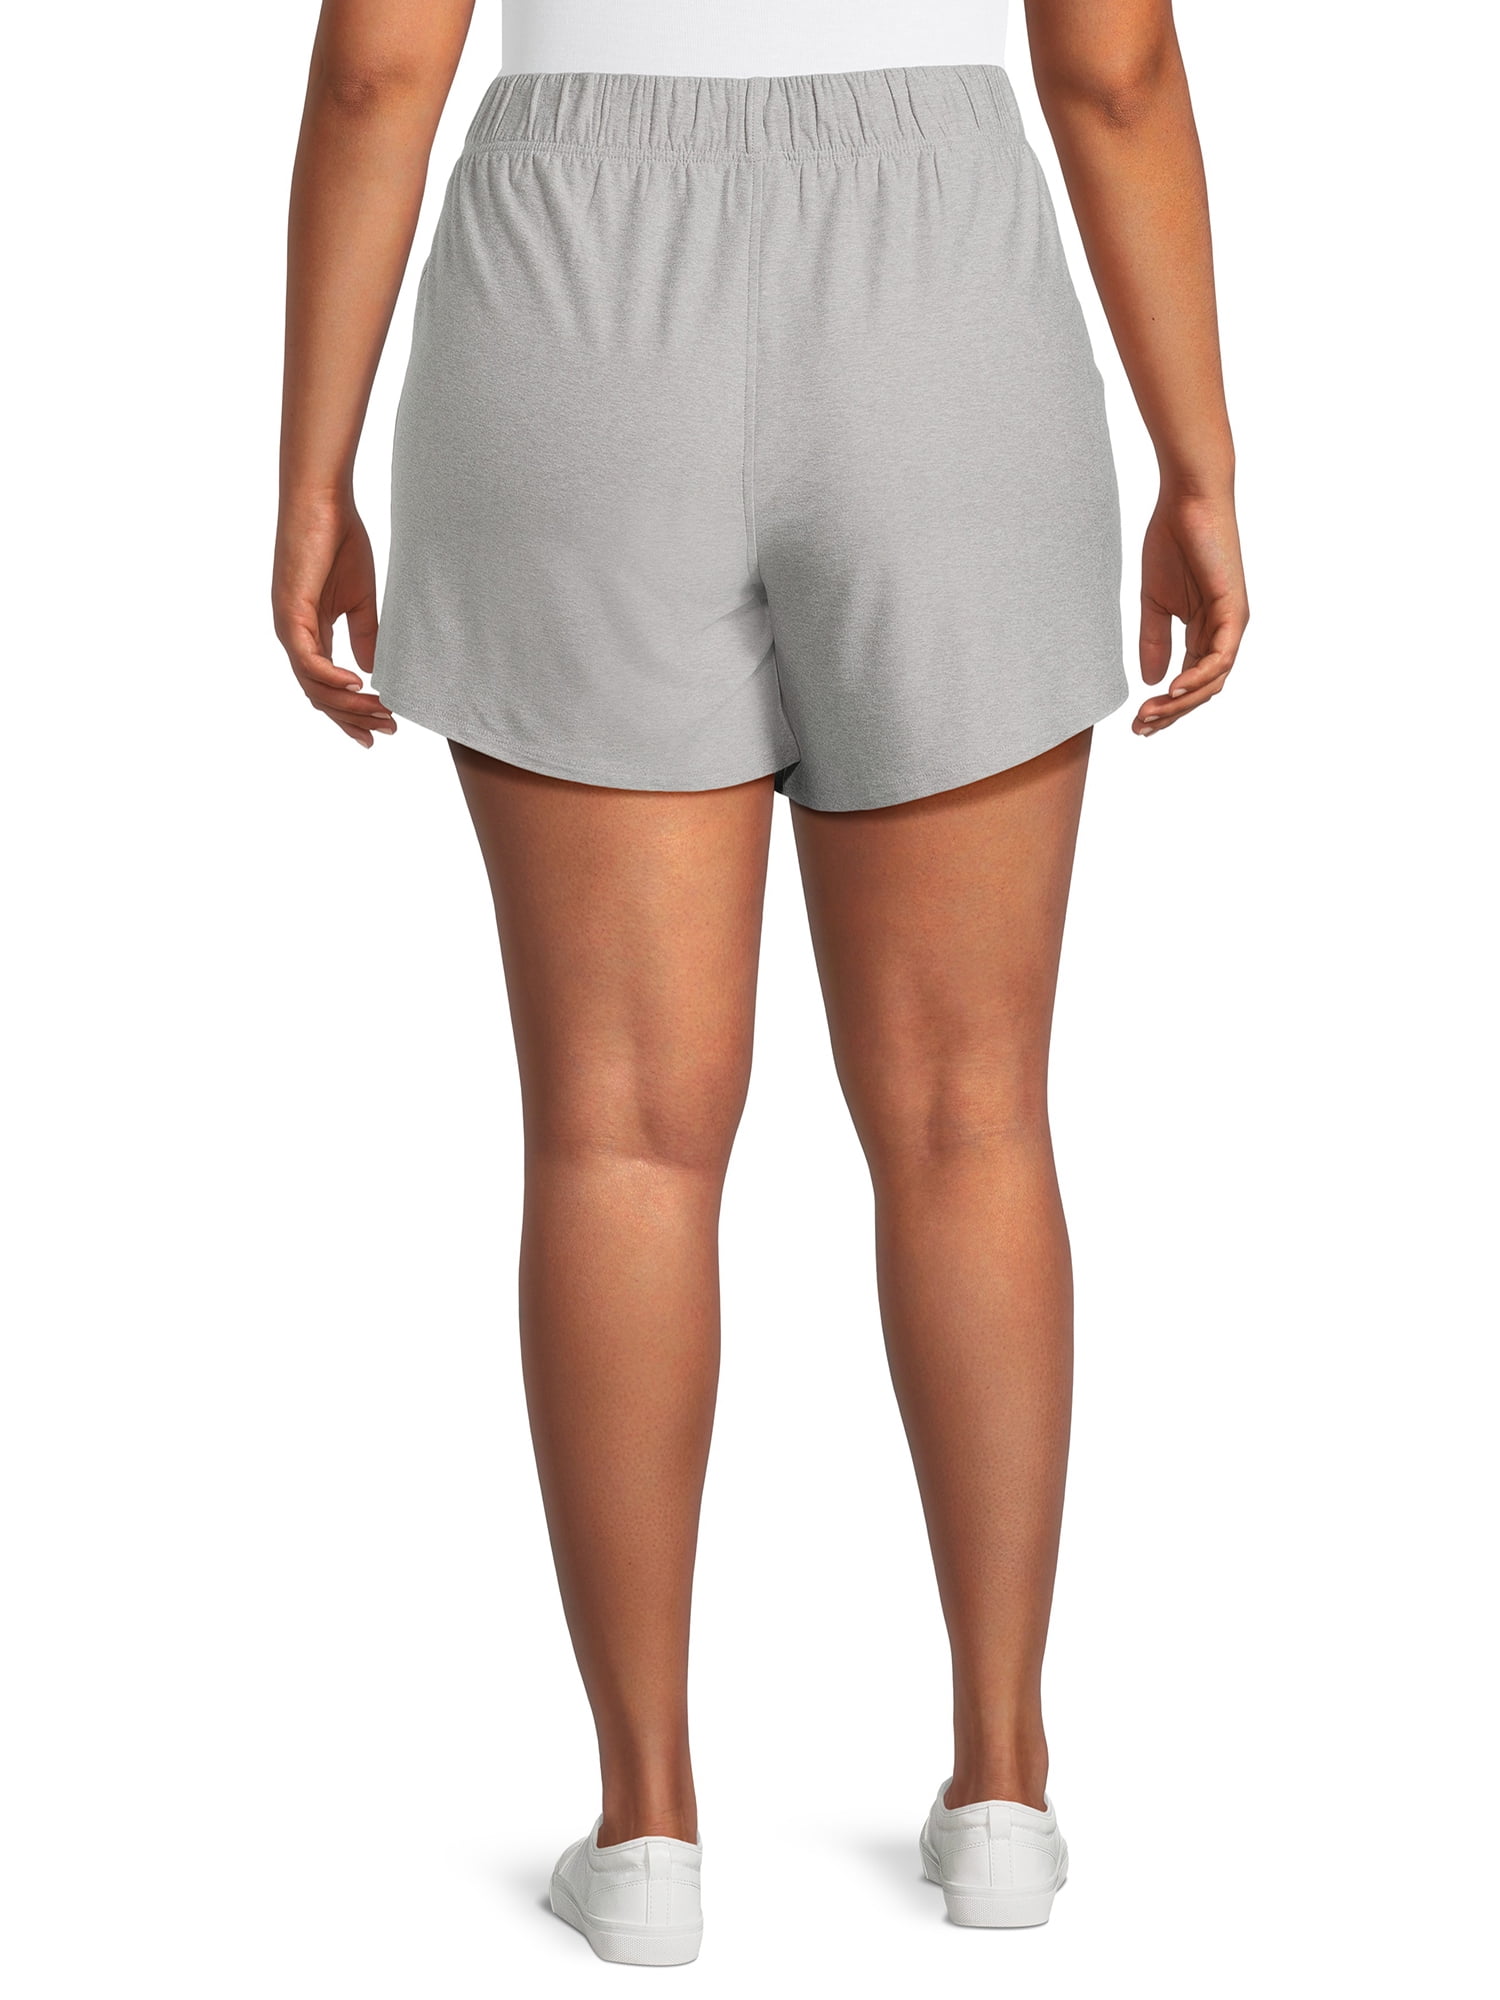 Athletic Works Women's and Women's Plus ButterCore Soft Performance Gym  Shorts, 4 Inseam, Size XS-XXXL 